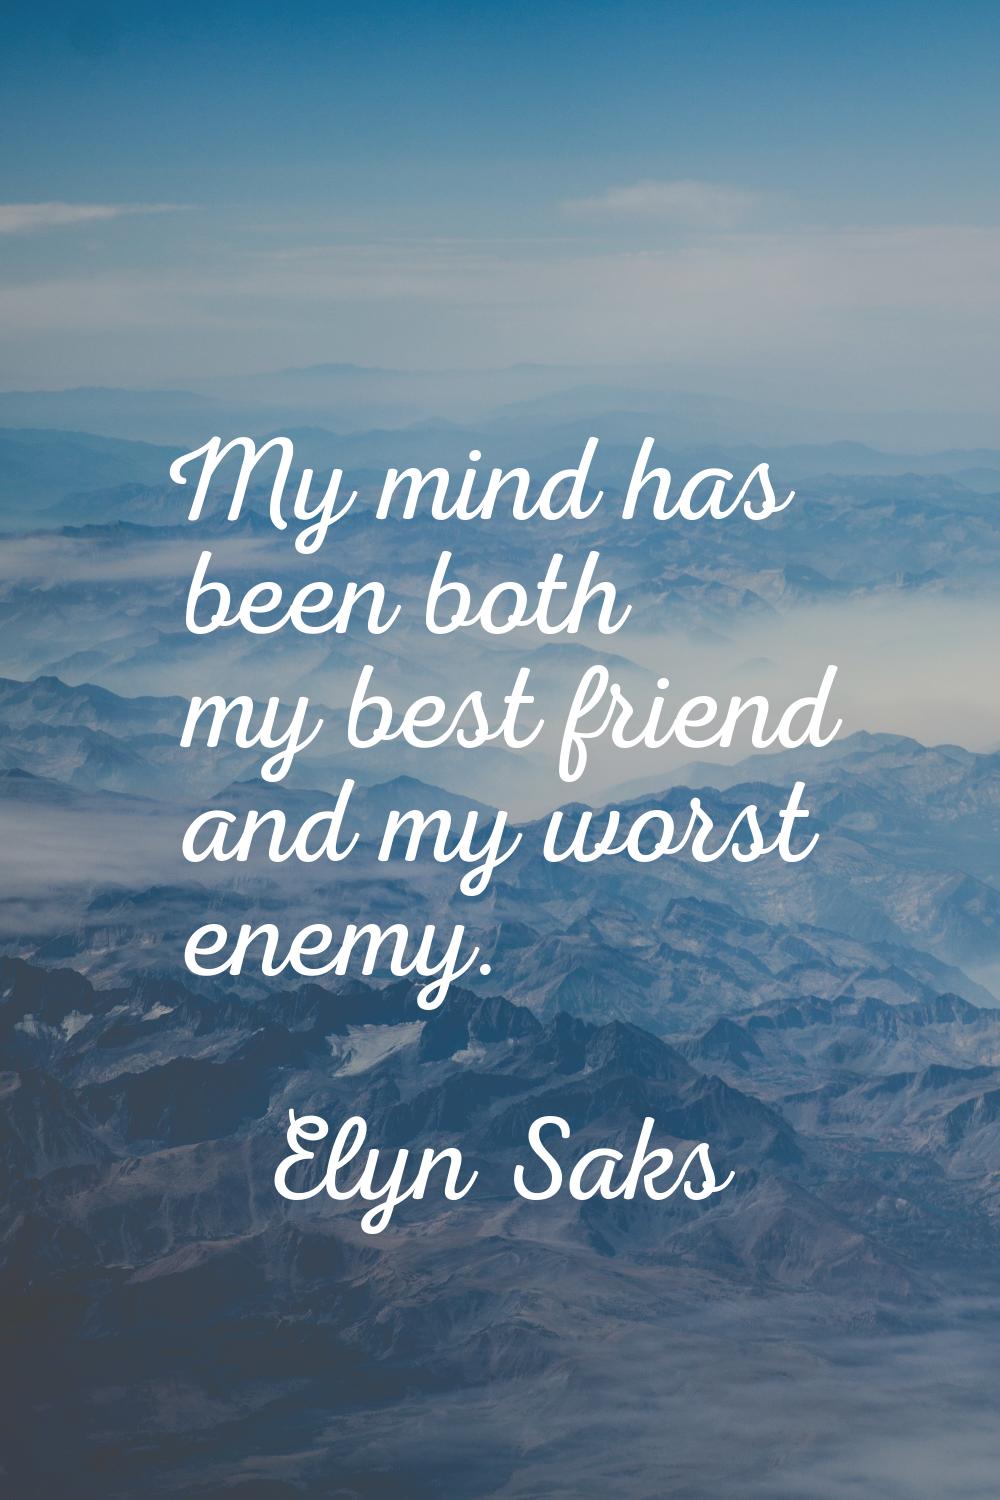 My mind has been both my best friend and my worst enemy.